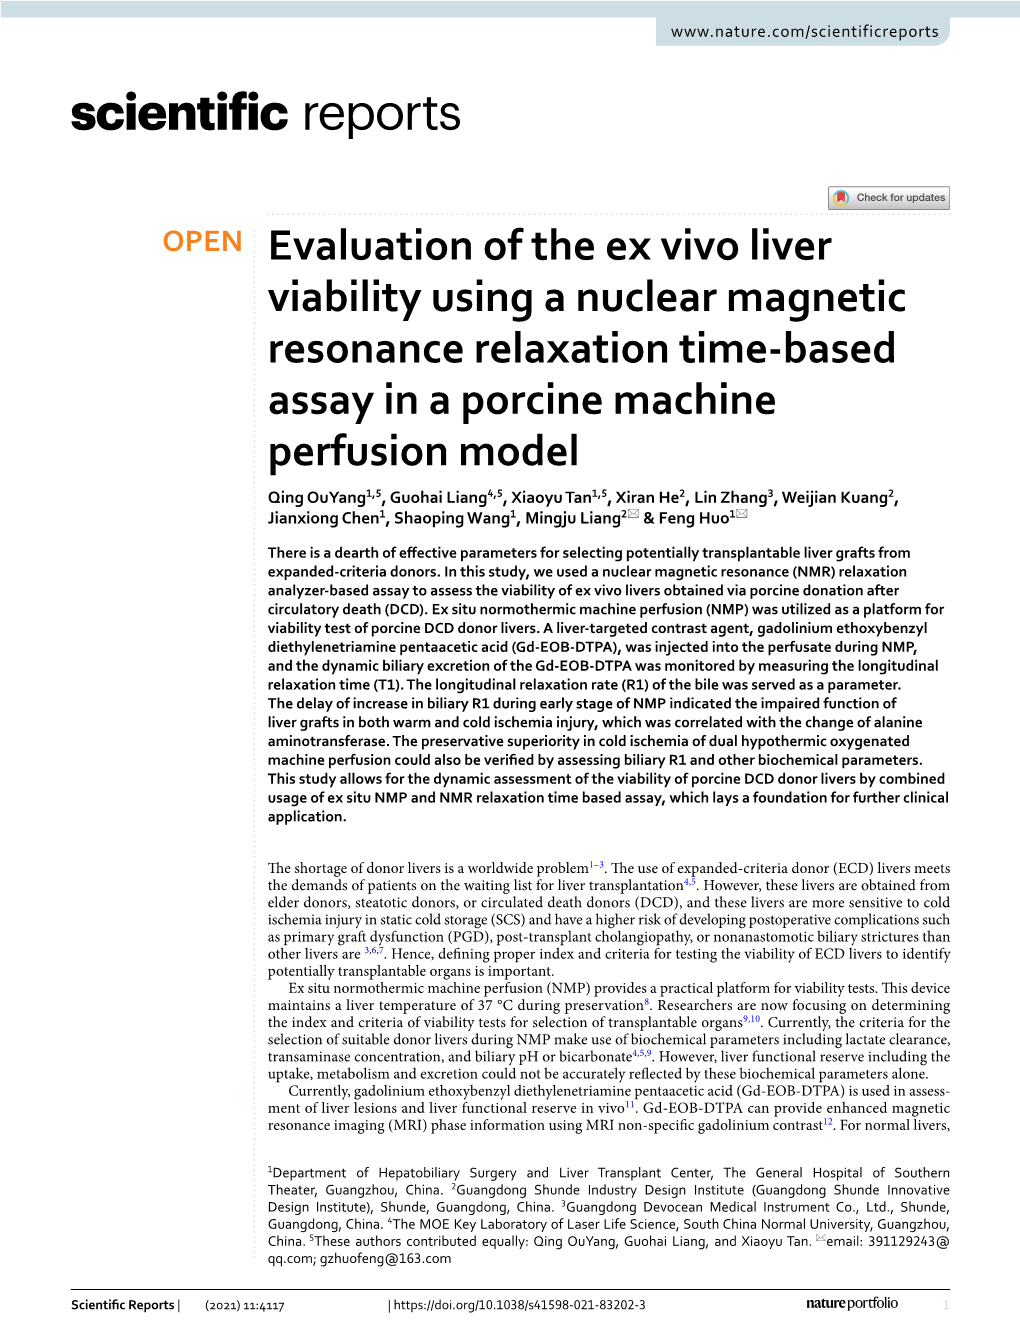 Evaluation of the Ex Vivo Liver Viability Using a Nuclear Magnetic